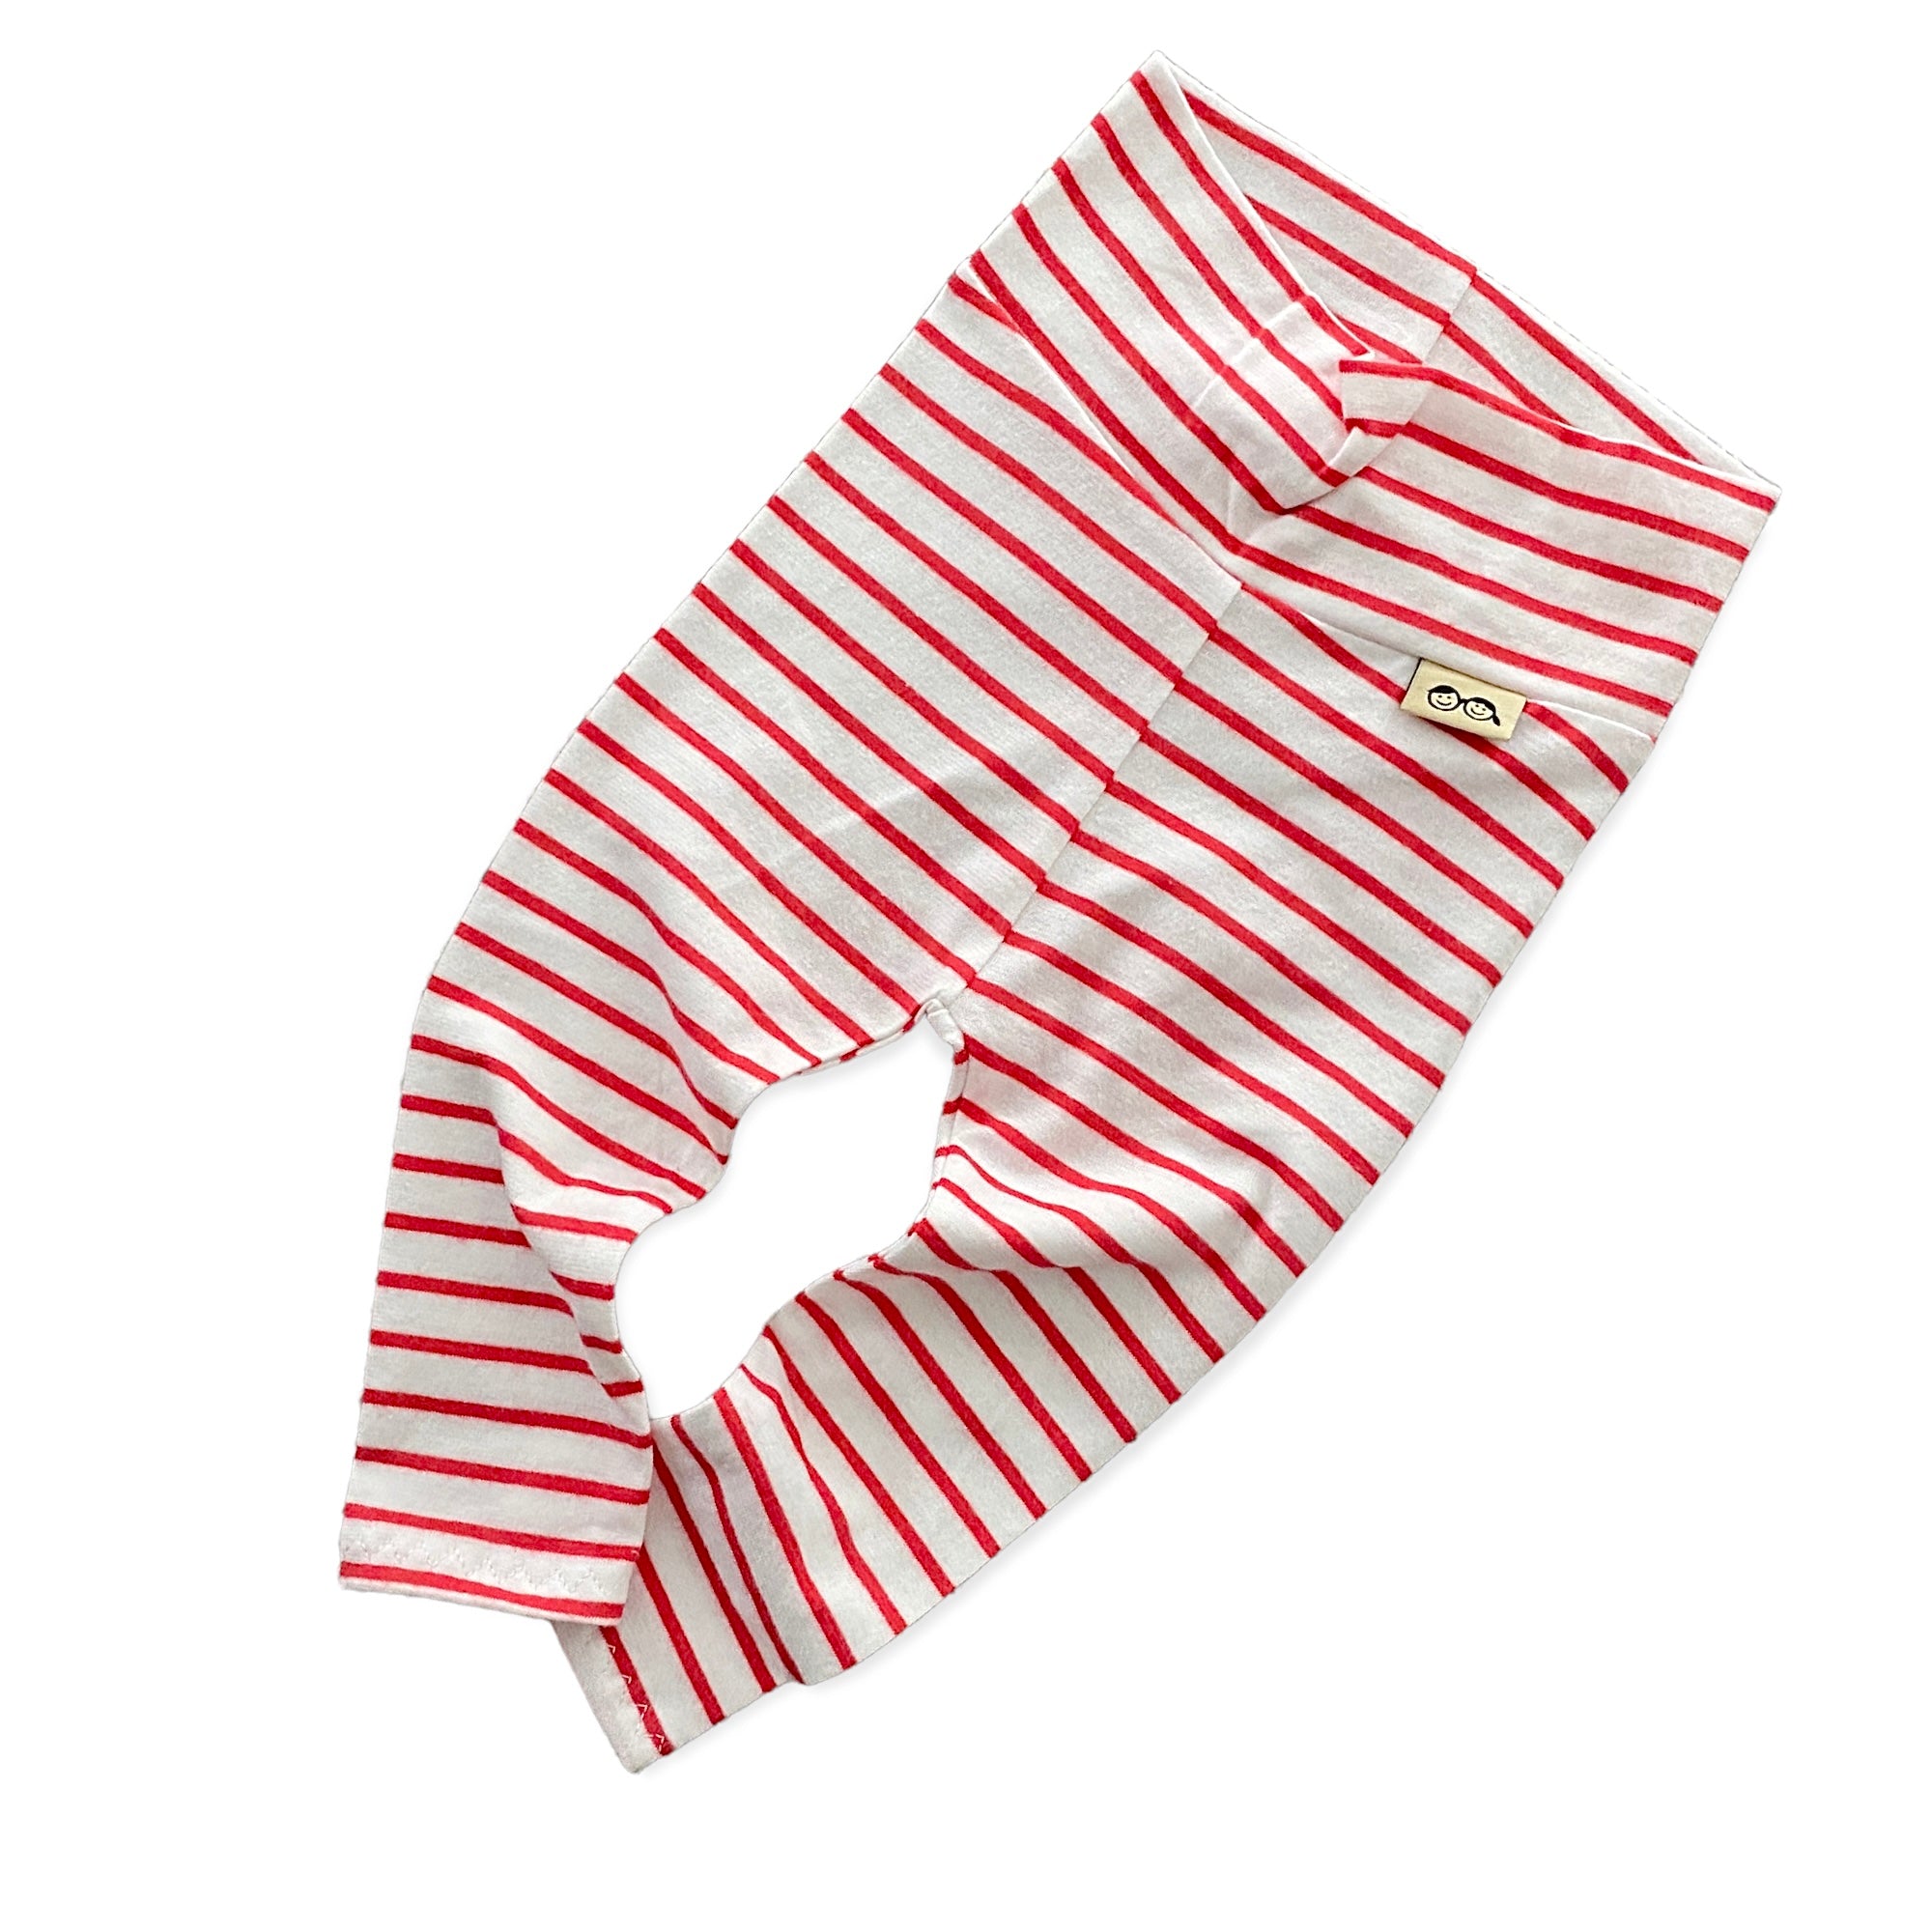 White and Red Stripes Leggings